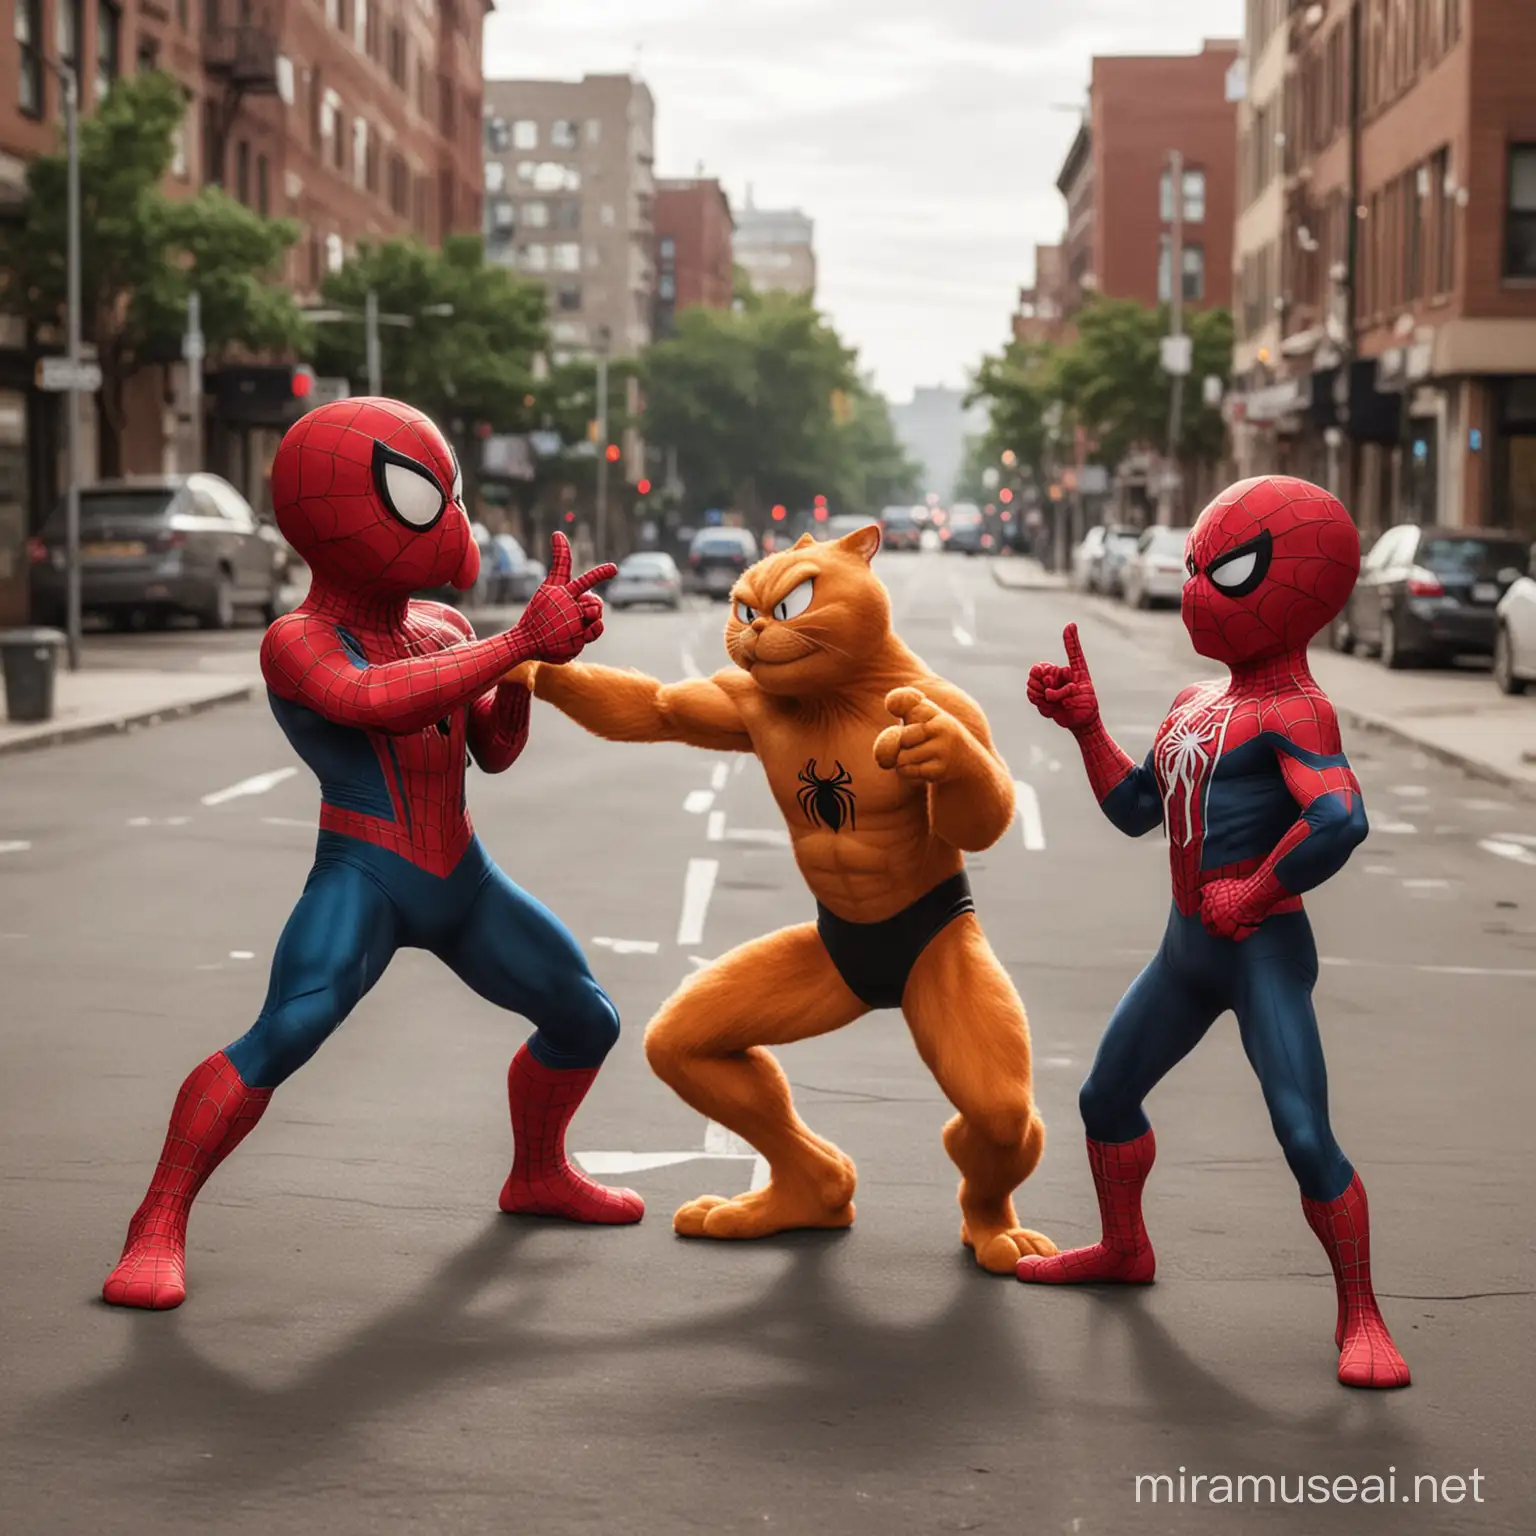 Garfield as spider man pointing at each other meme

